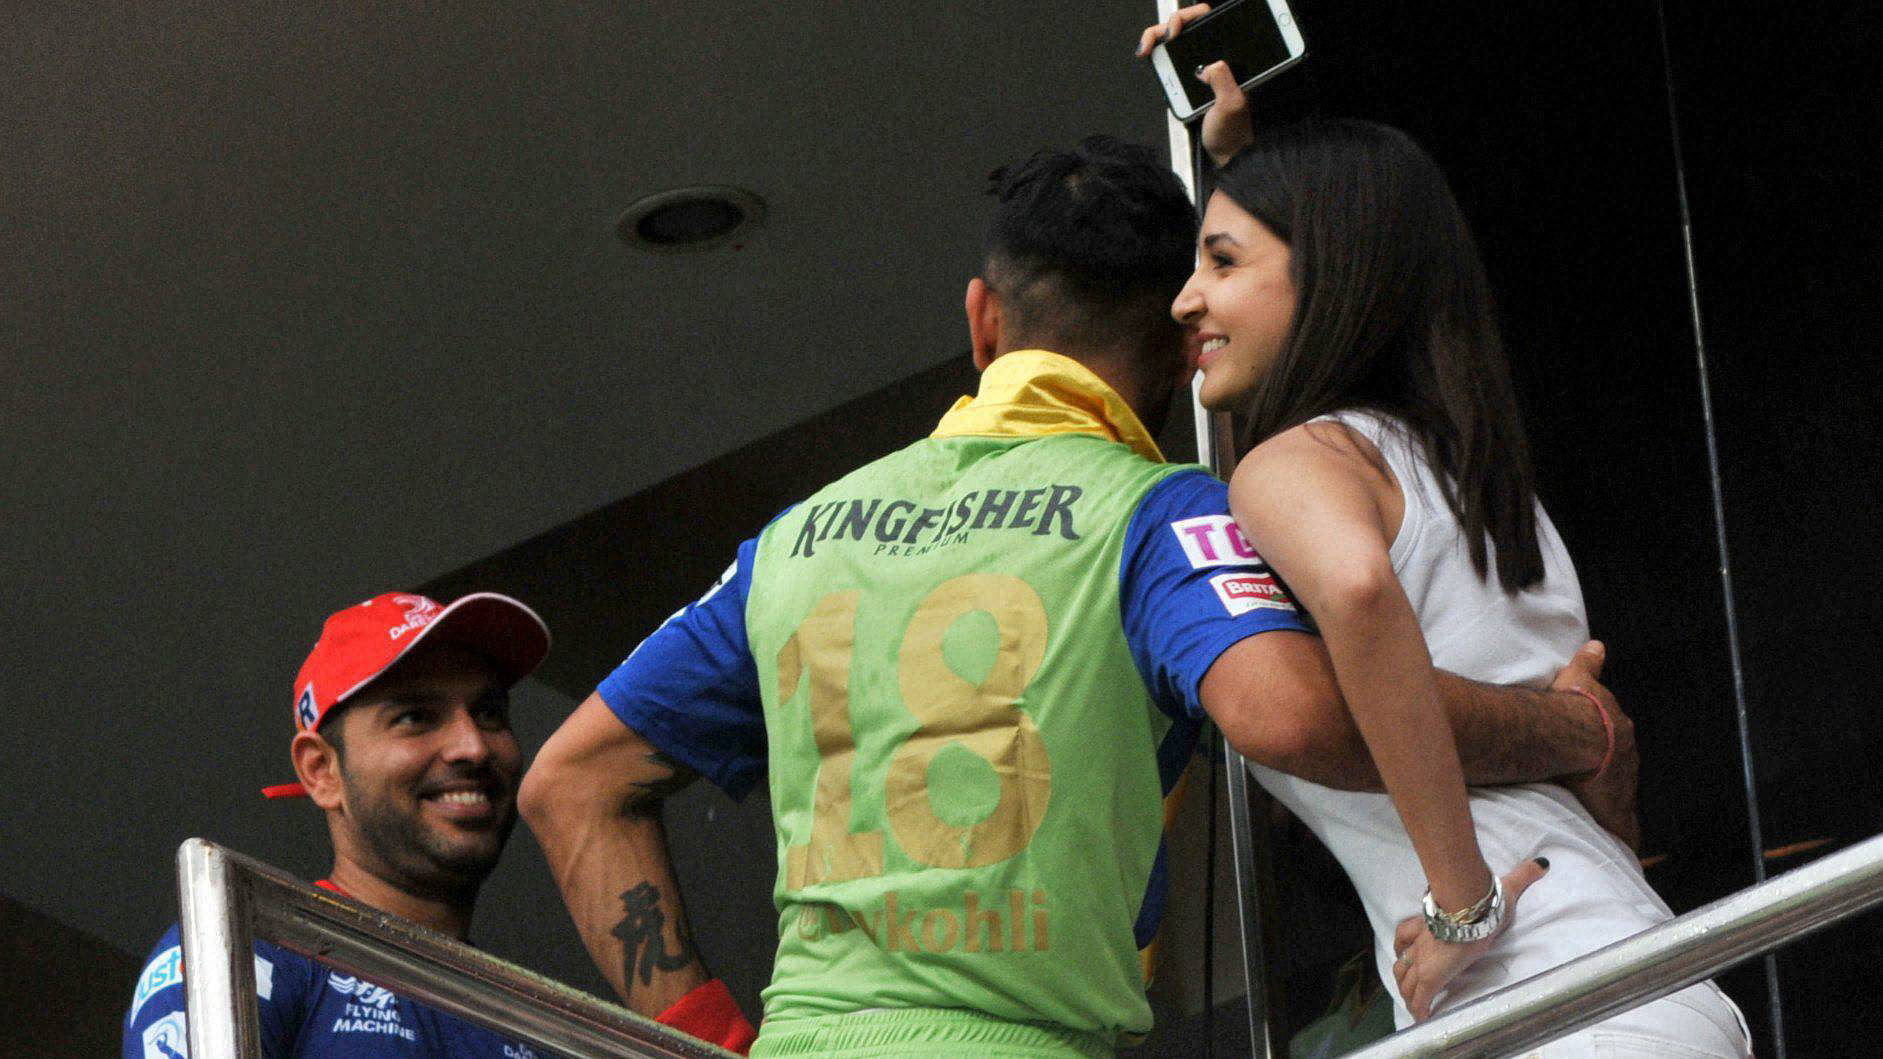 Virat Kohli and Anushkha Sharma in the stands during the IPL game between RCB and DD. (Photo: BCCI/PTI)